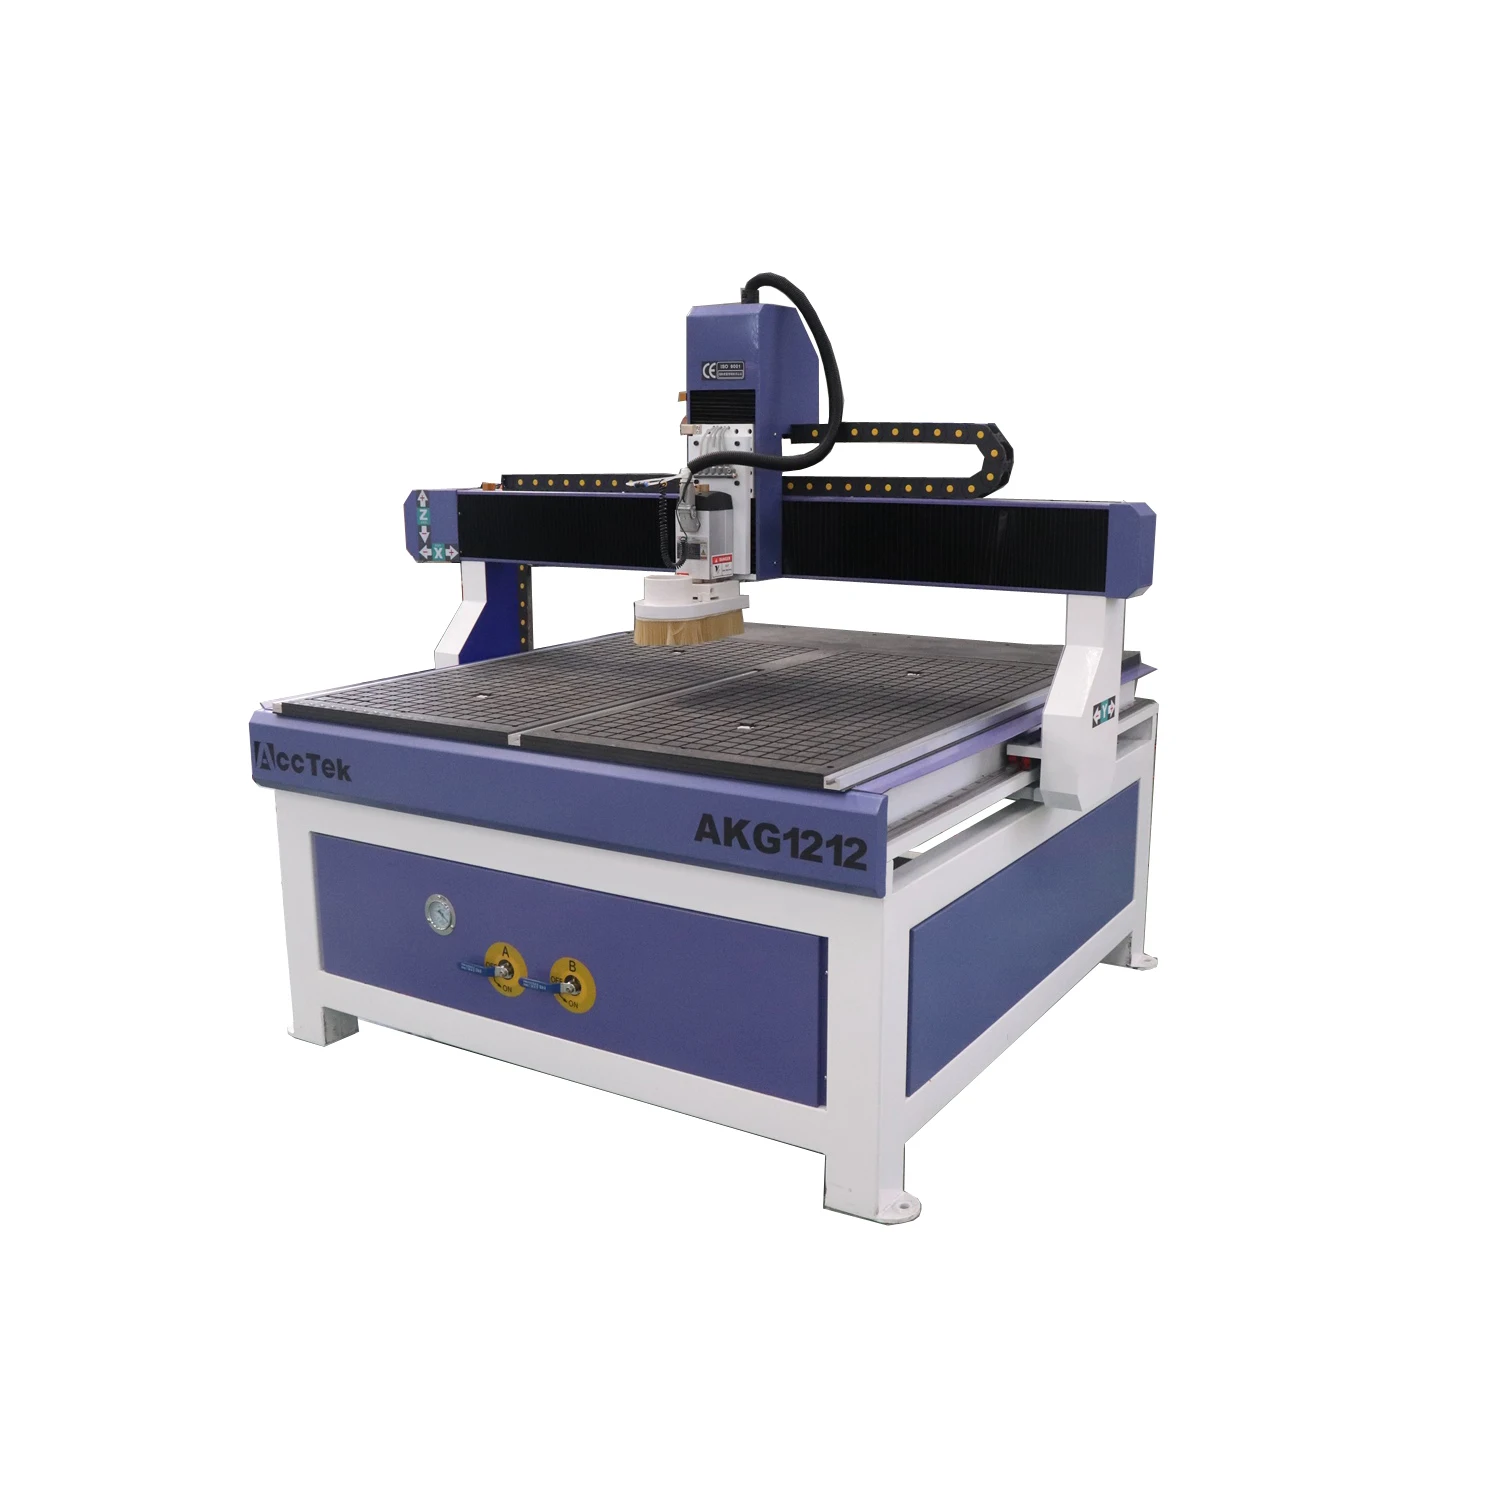 

Hot Sales! 1212 6012 6090 1325 CNC Router Automatic Wood Carving Machine Woodworking Cutting Machine